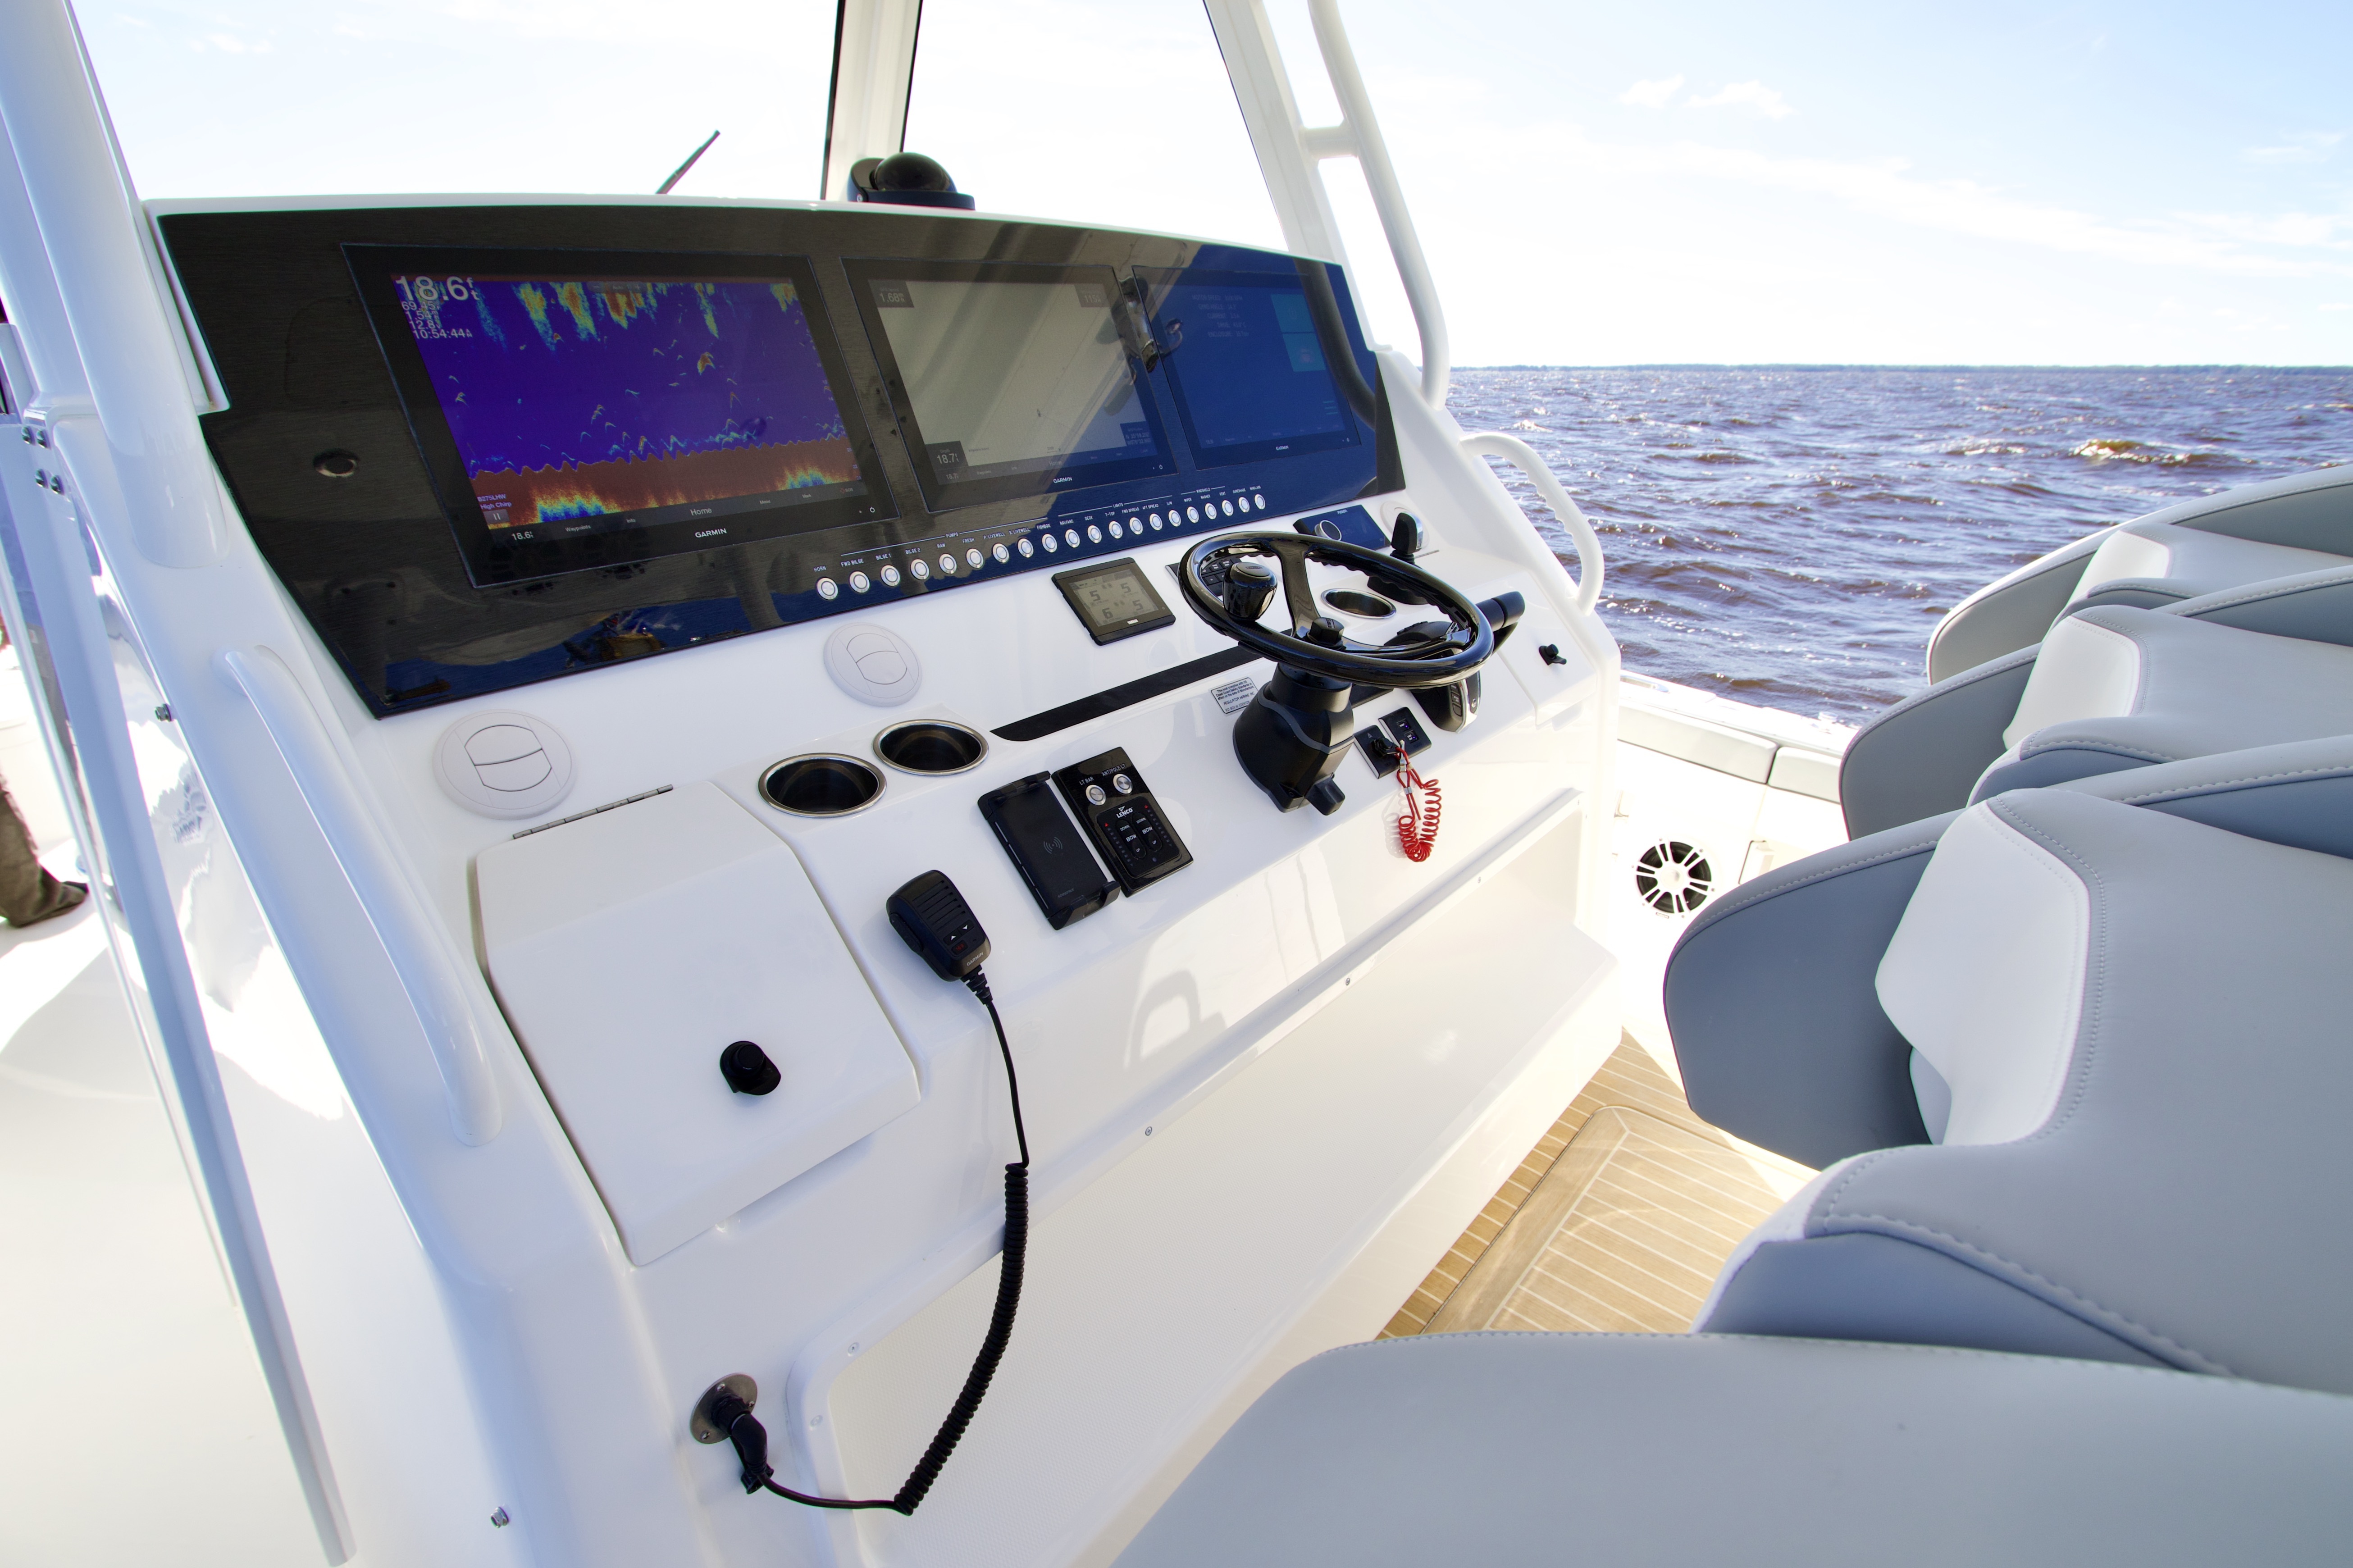 Check out our Range of Garmin Marine Electronics